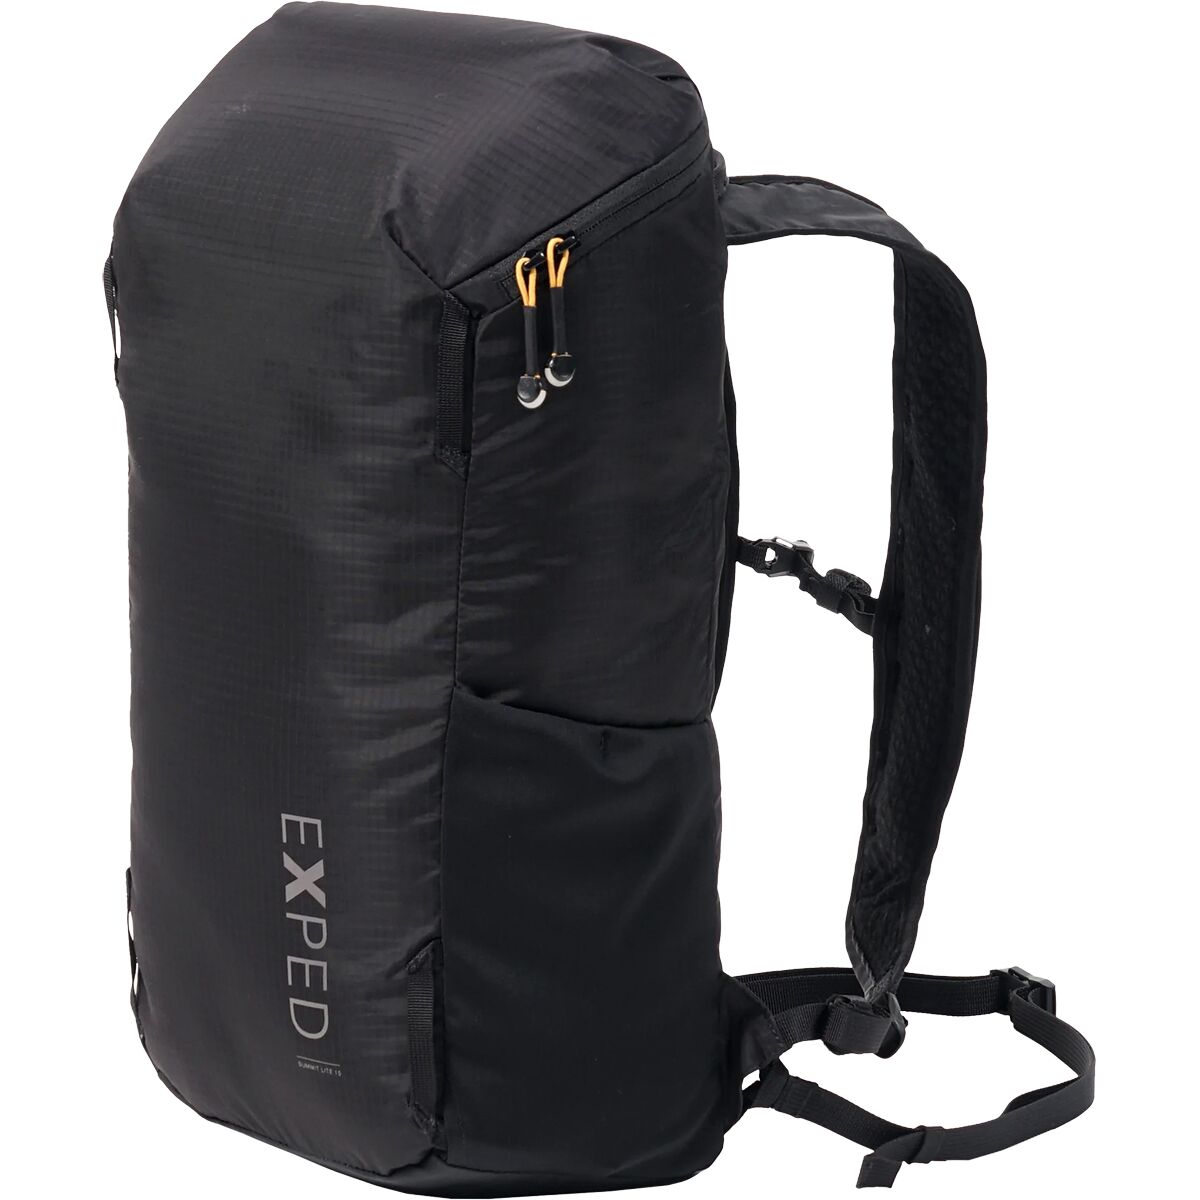 Exped Summit Lite 15L Backpack